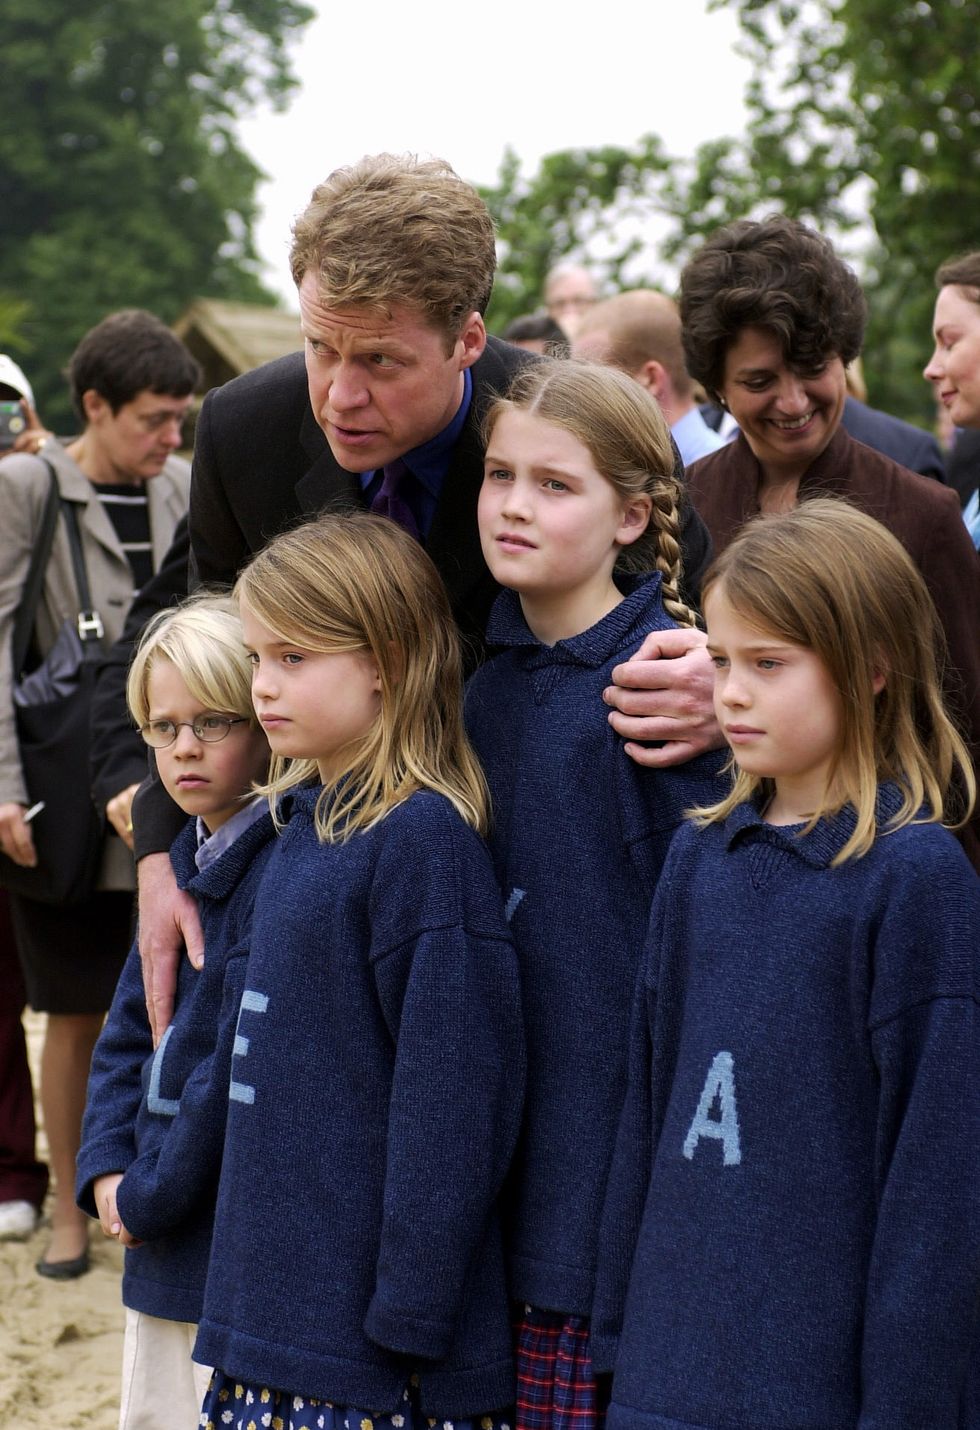 london, united kingdom   june 30  earl spencer, brother of princess of wales, with his children at opening of the  princess of wales memorial playground in kensington gardens in london l to r  louis  viscount althorp eliza, kitty, amelia  photo by tim graham photo library via getty images